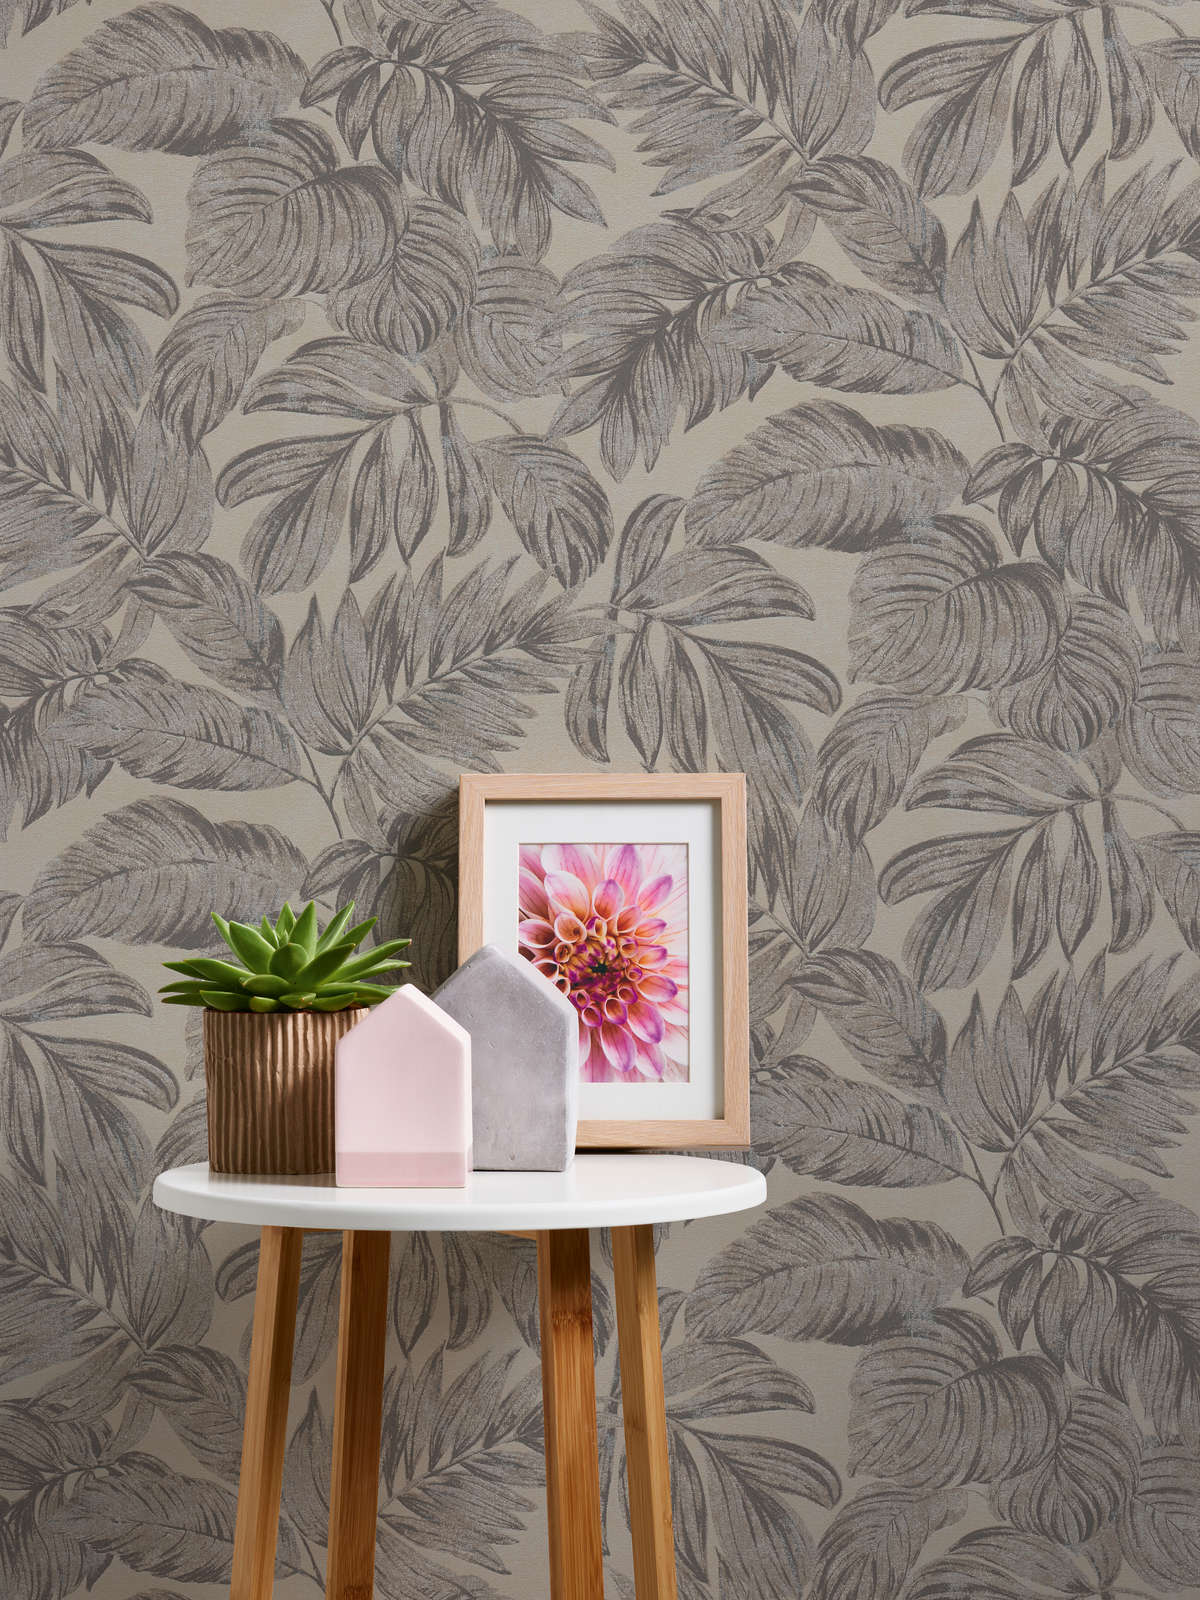             Non-woven wallpaper with jungle leaf pattern - brown, grey, beige
        